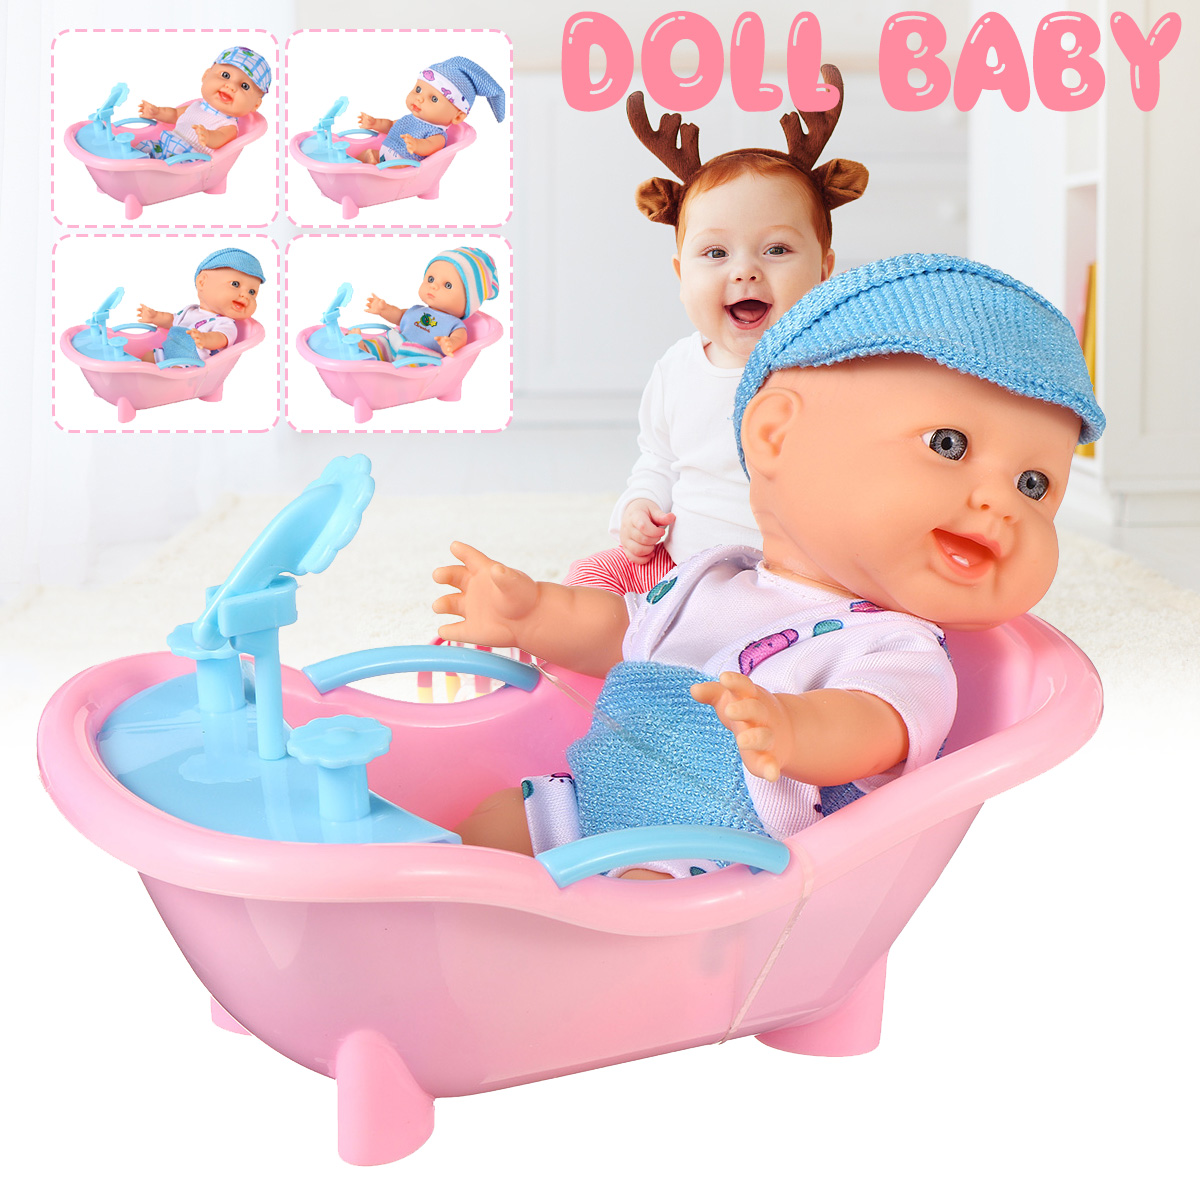 Simulation-Baby-3D-Creative-Cute-Doll-Play-House-Toy-Doll-Vinyl-Doll-Gift-1818656-2